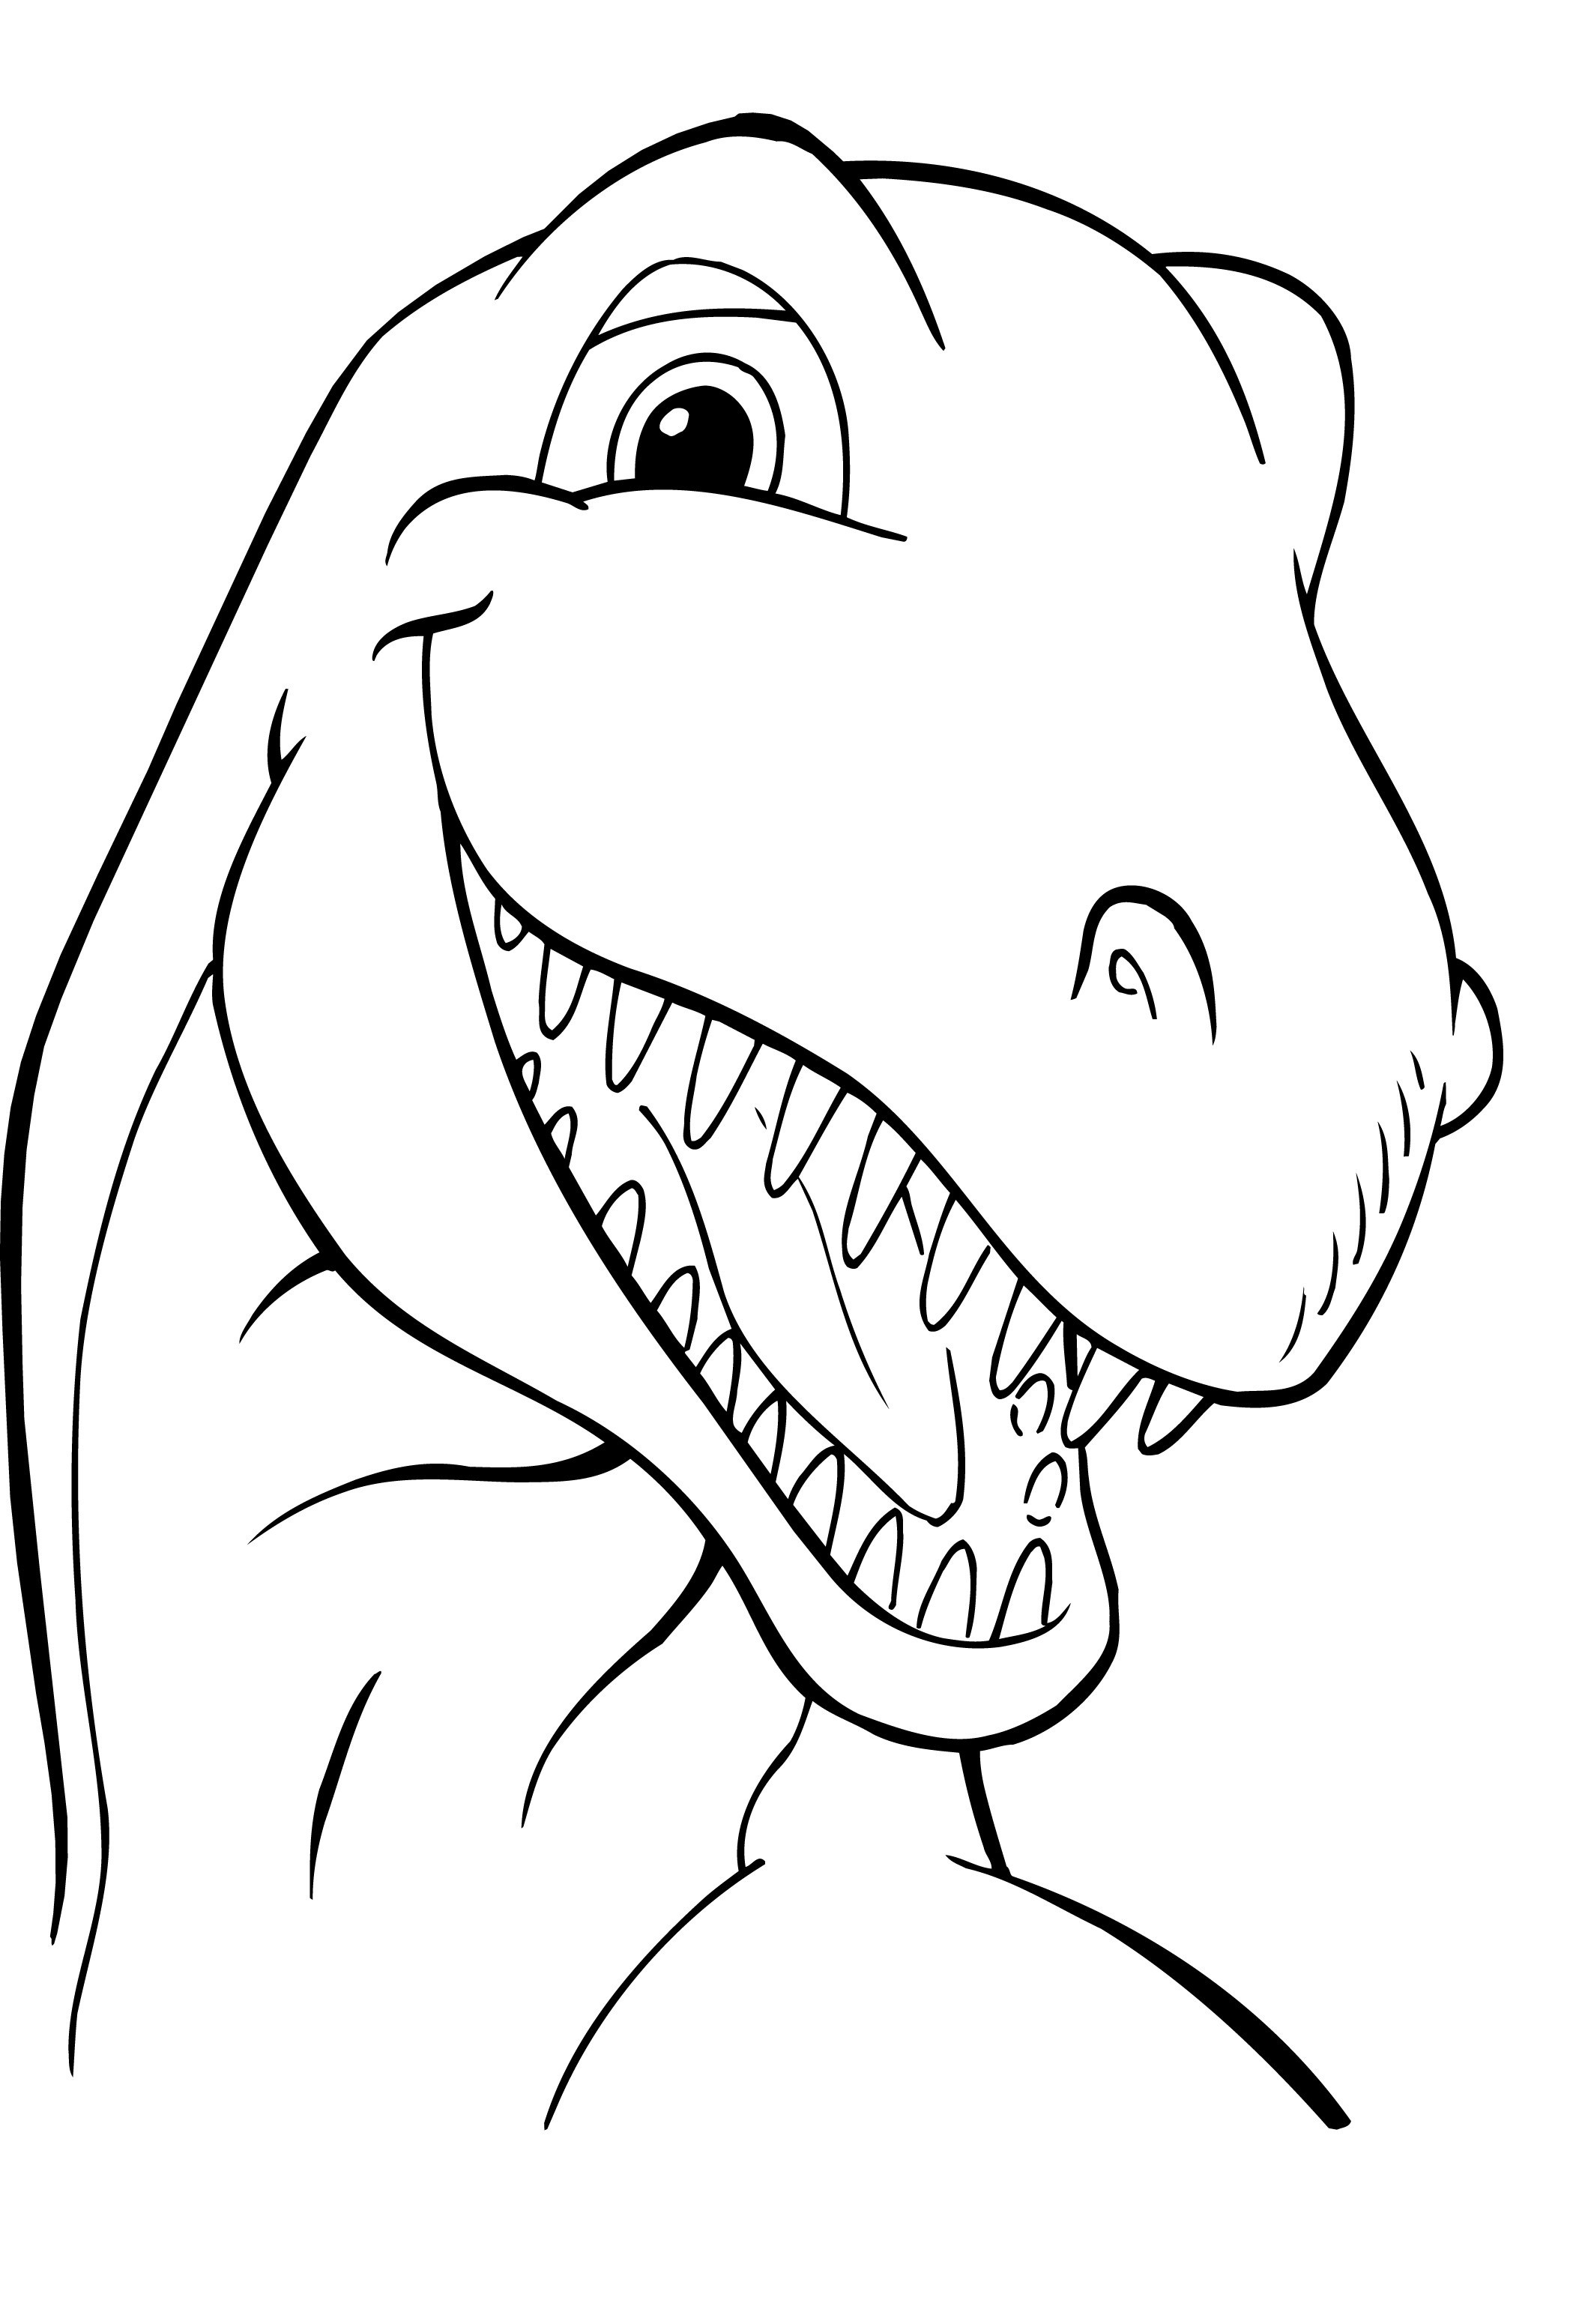 20 Best Free Printable Dinosaur Coloring Pages Best Collections Ever